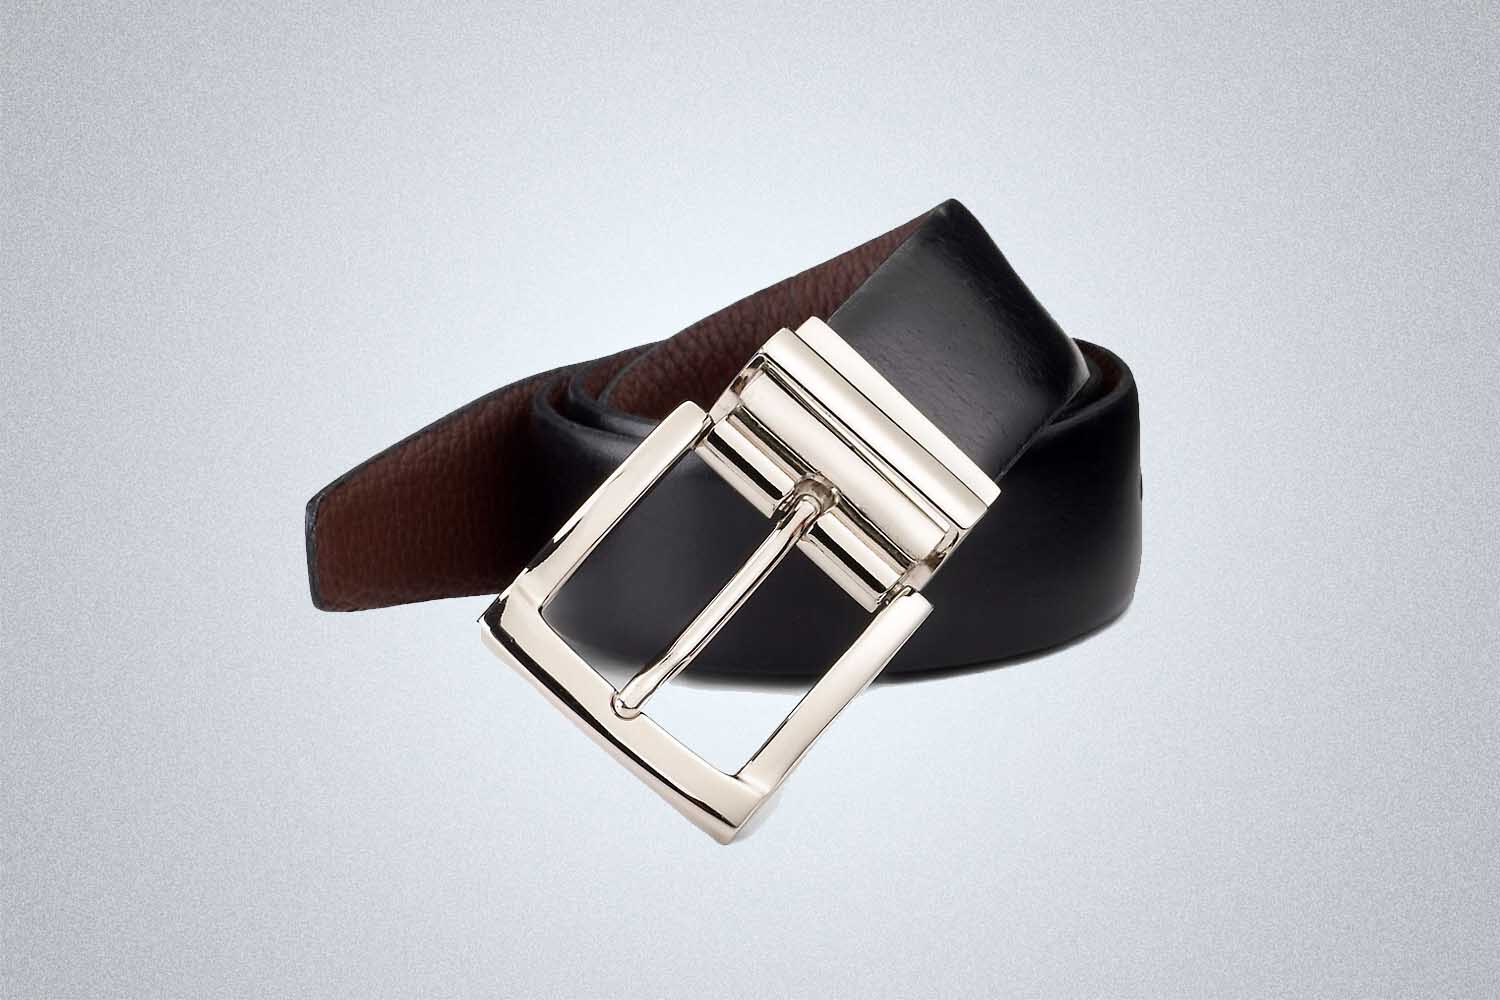 Saks Fifth Avenue COLLECTION Reversible Leather Belt, now on sale